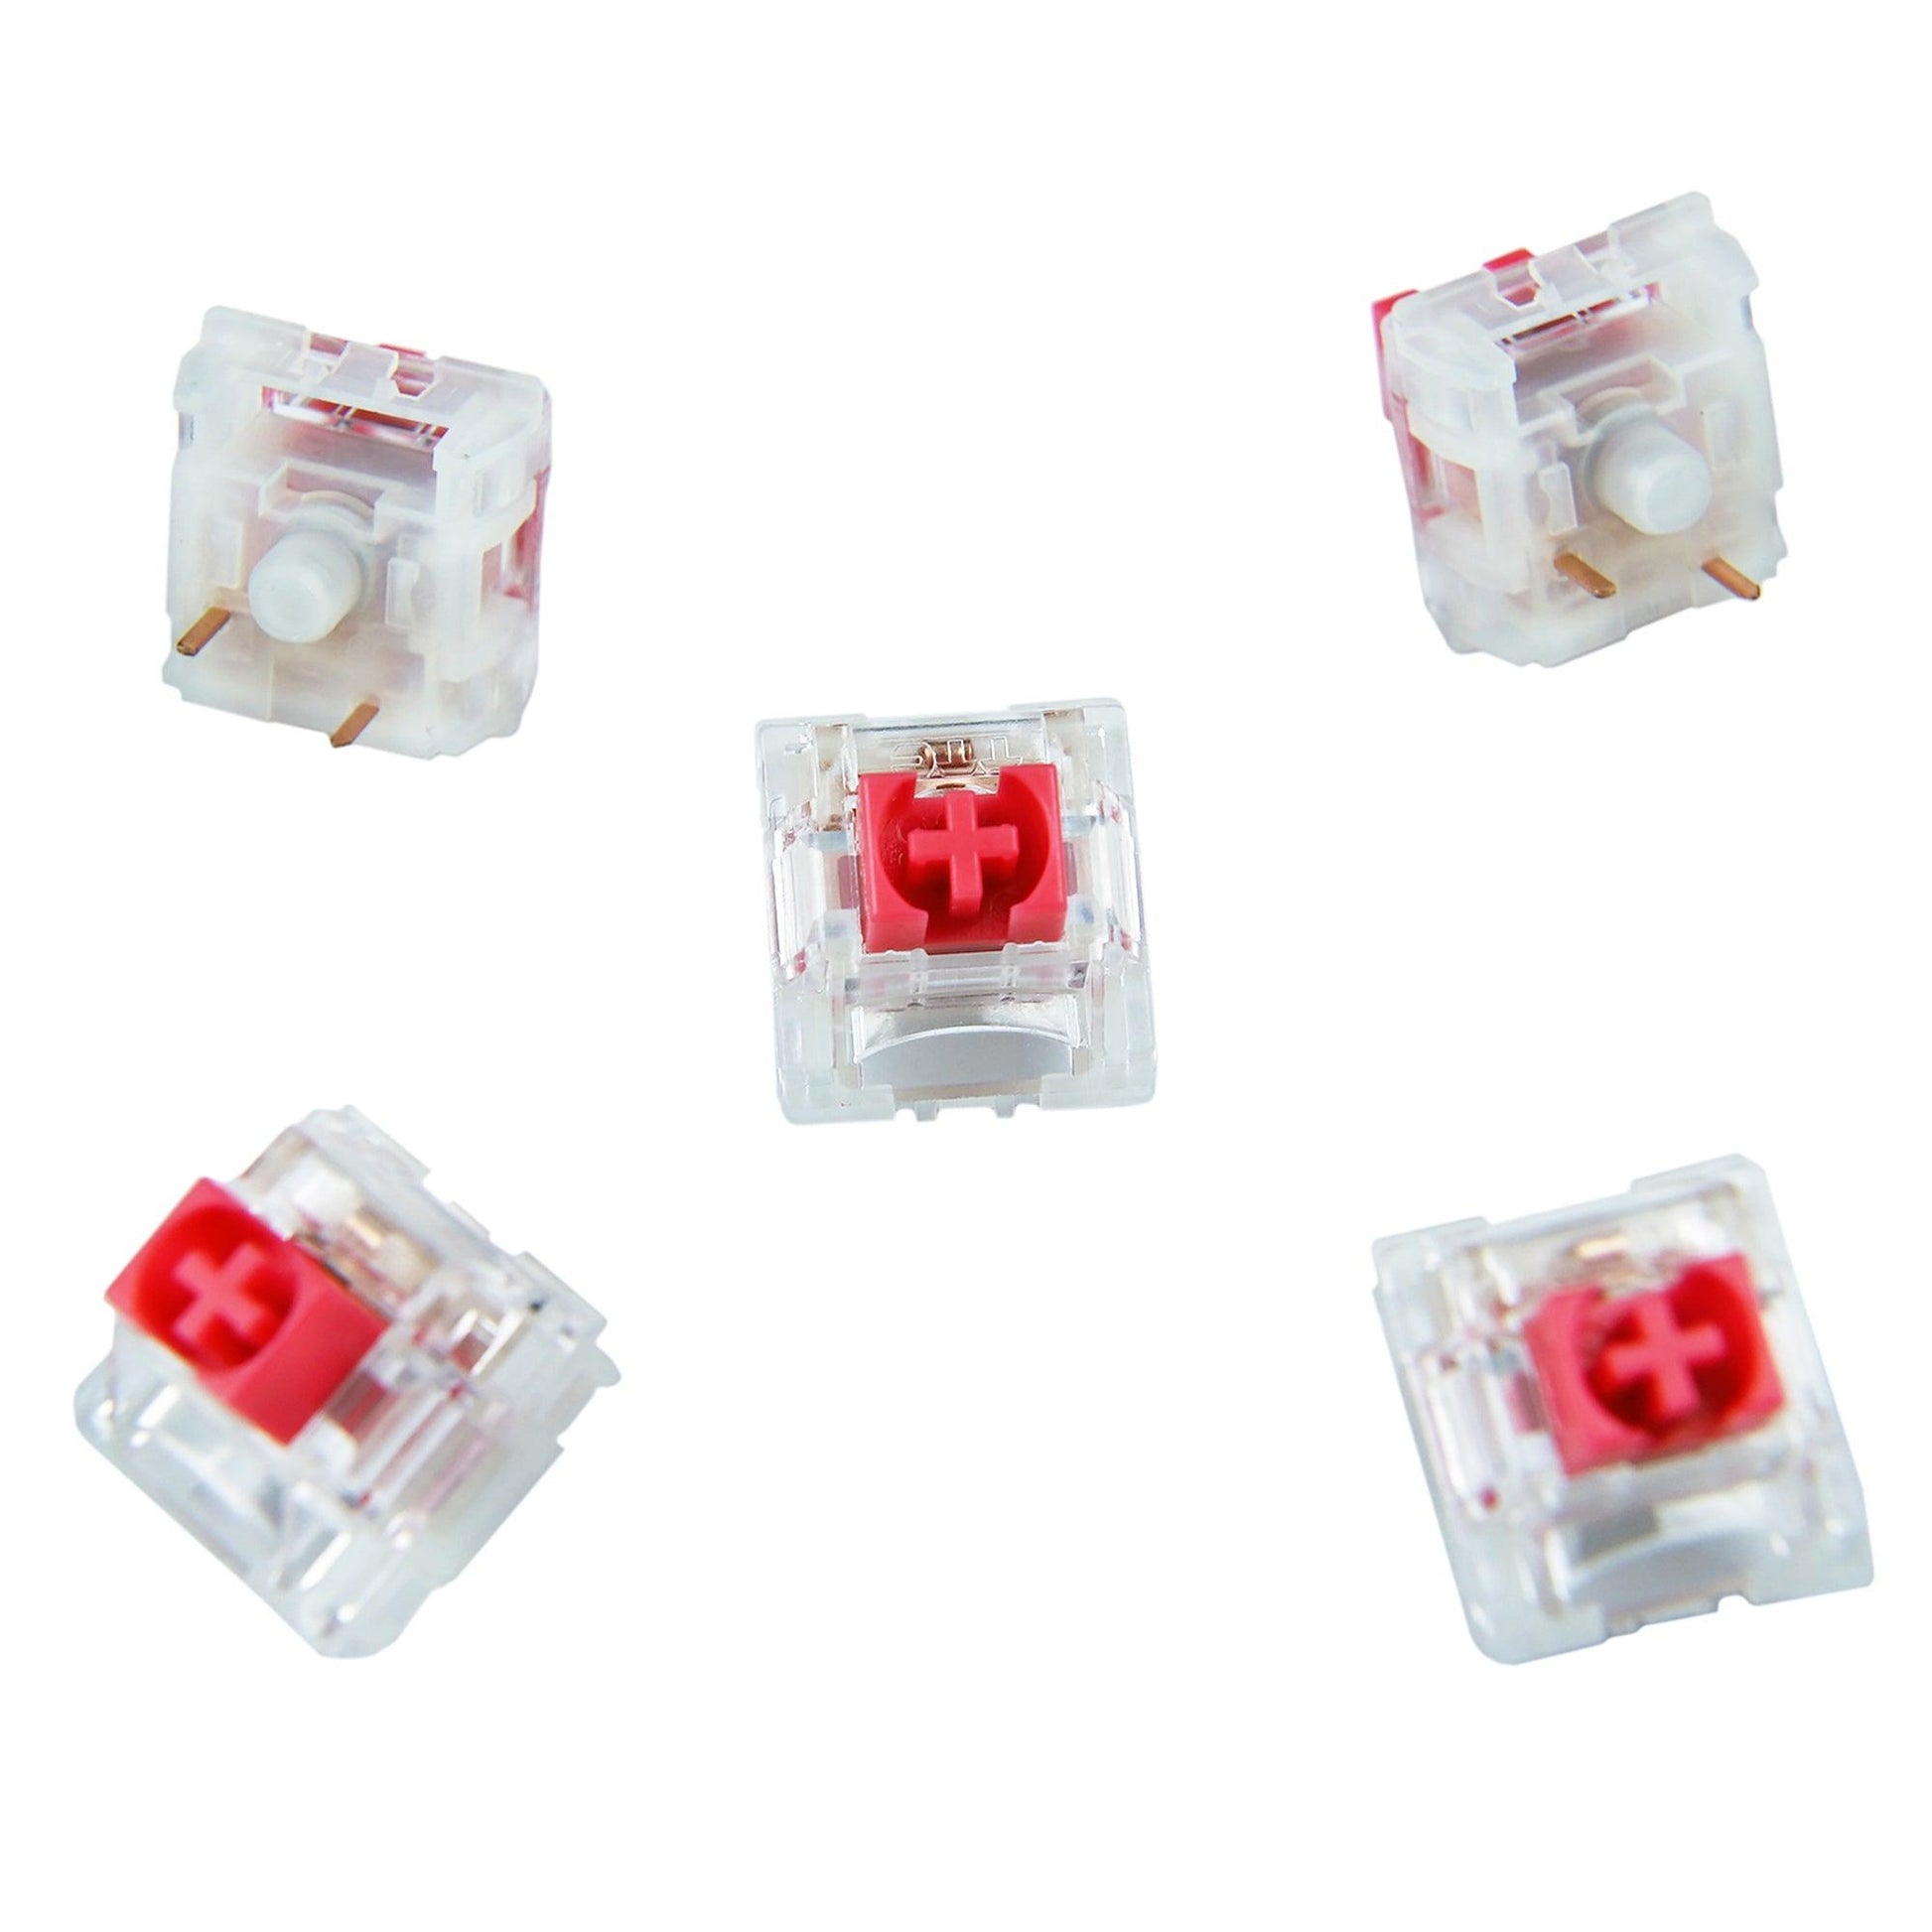 TTC 3 Pin 45g Linear Silent Red (Factory Pre-lubed) RGB SMD Switches Gold Plated Spring - IPOPULARSHOP